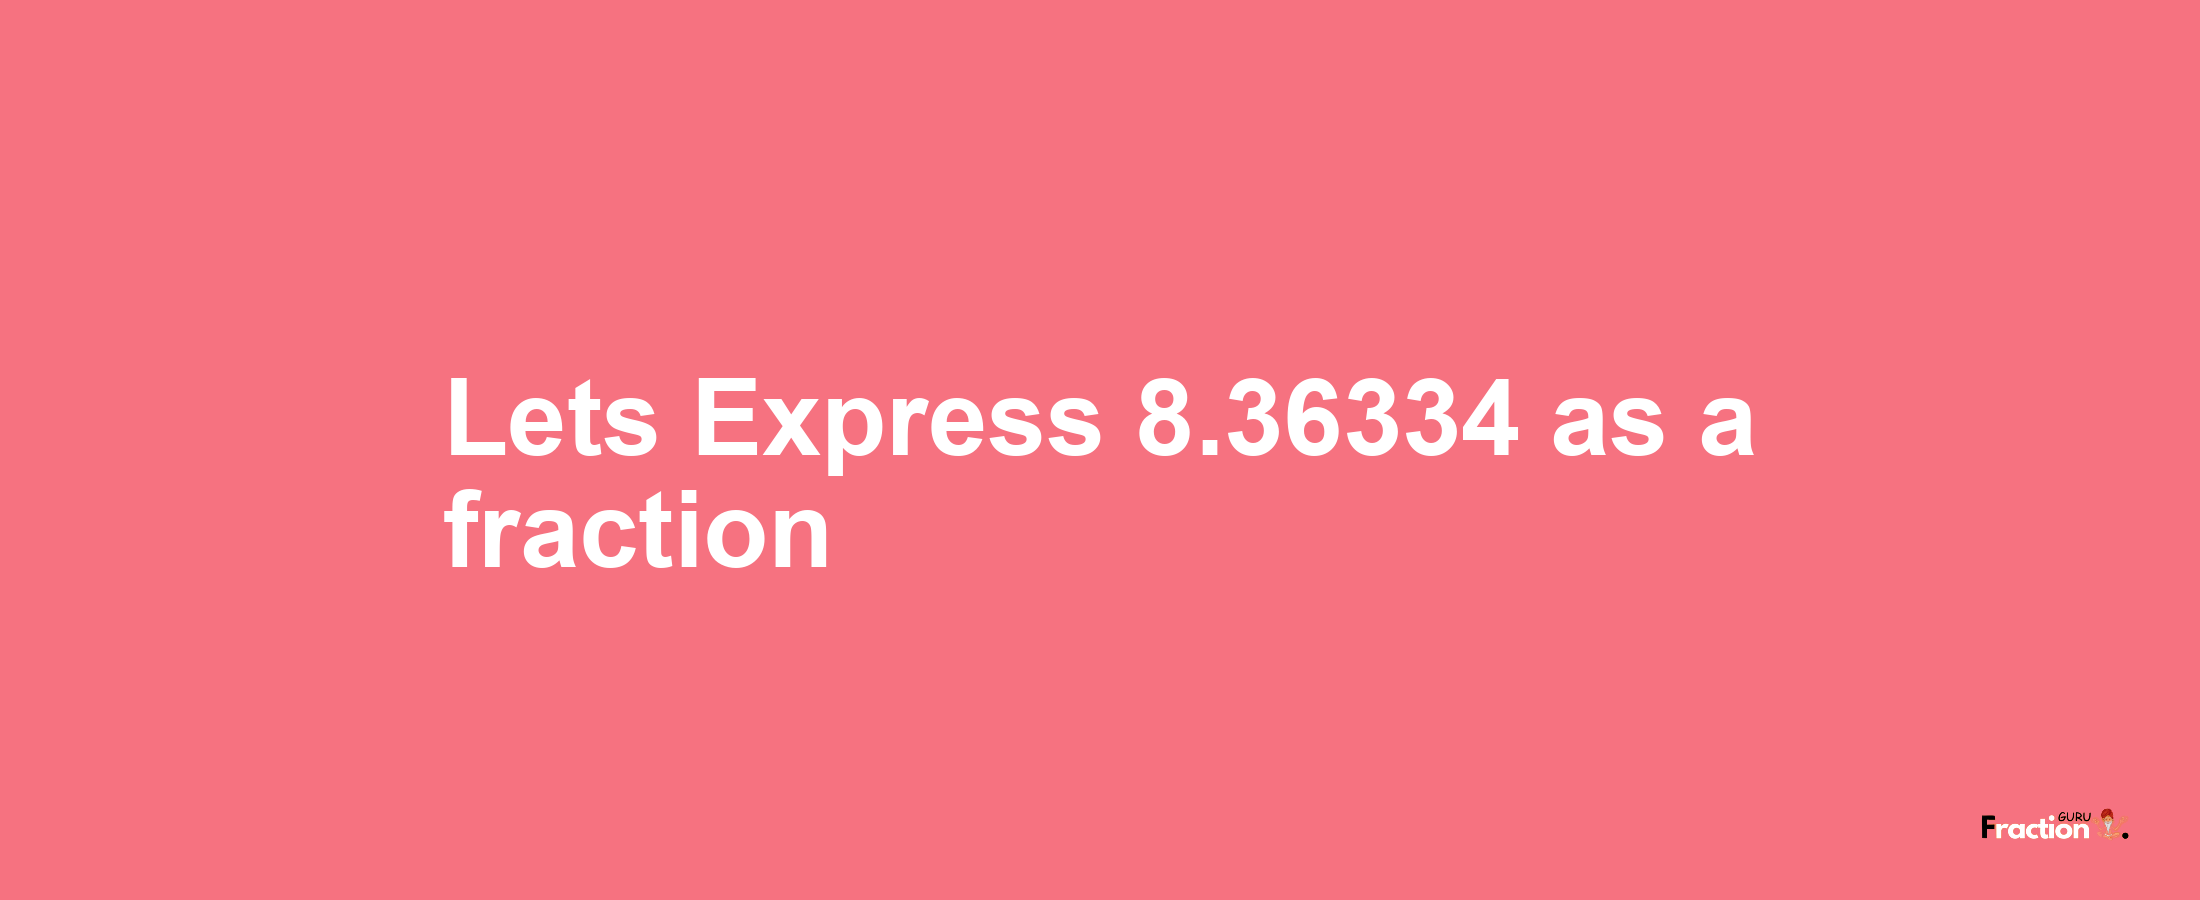 Lets Express 8.36334 as afraction